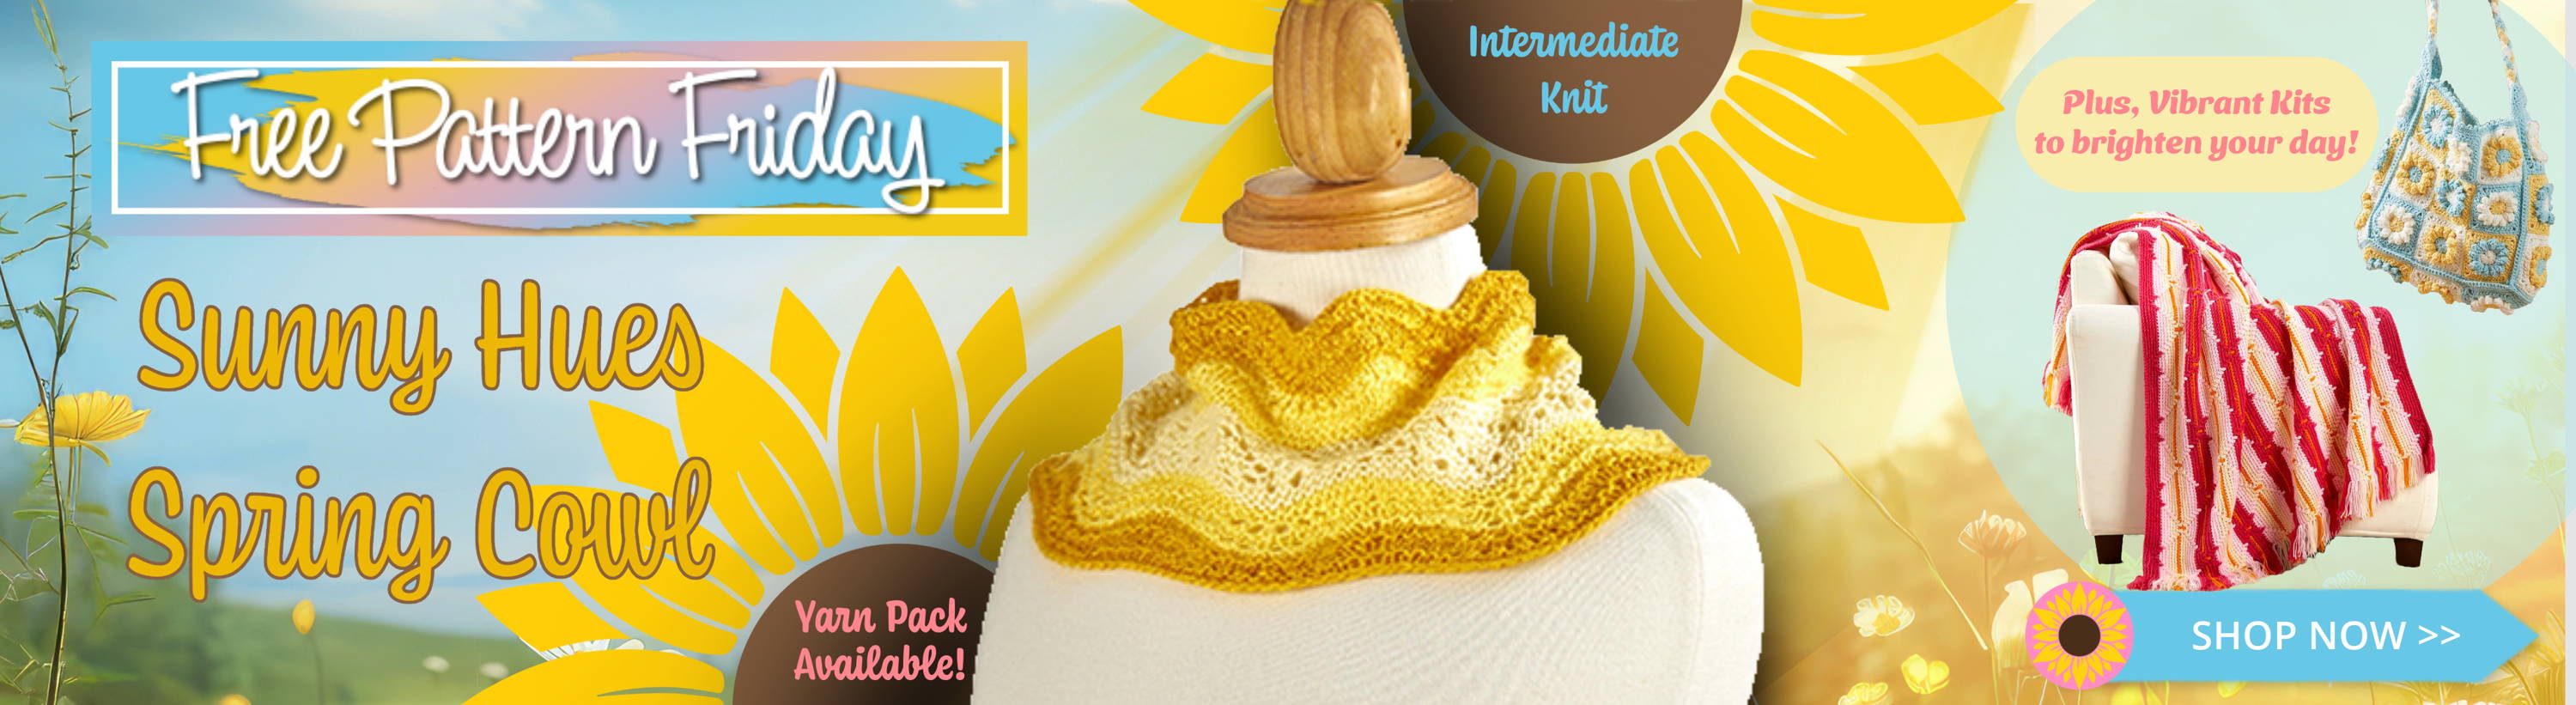 Free Pattern Friday! Sunny Hues Spring Cowl (Intermediate Knit). Yarn Pack Available. Download now.